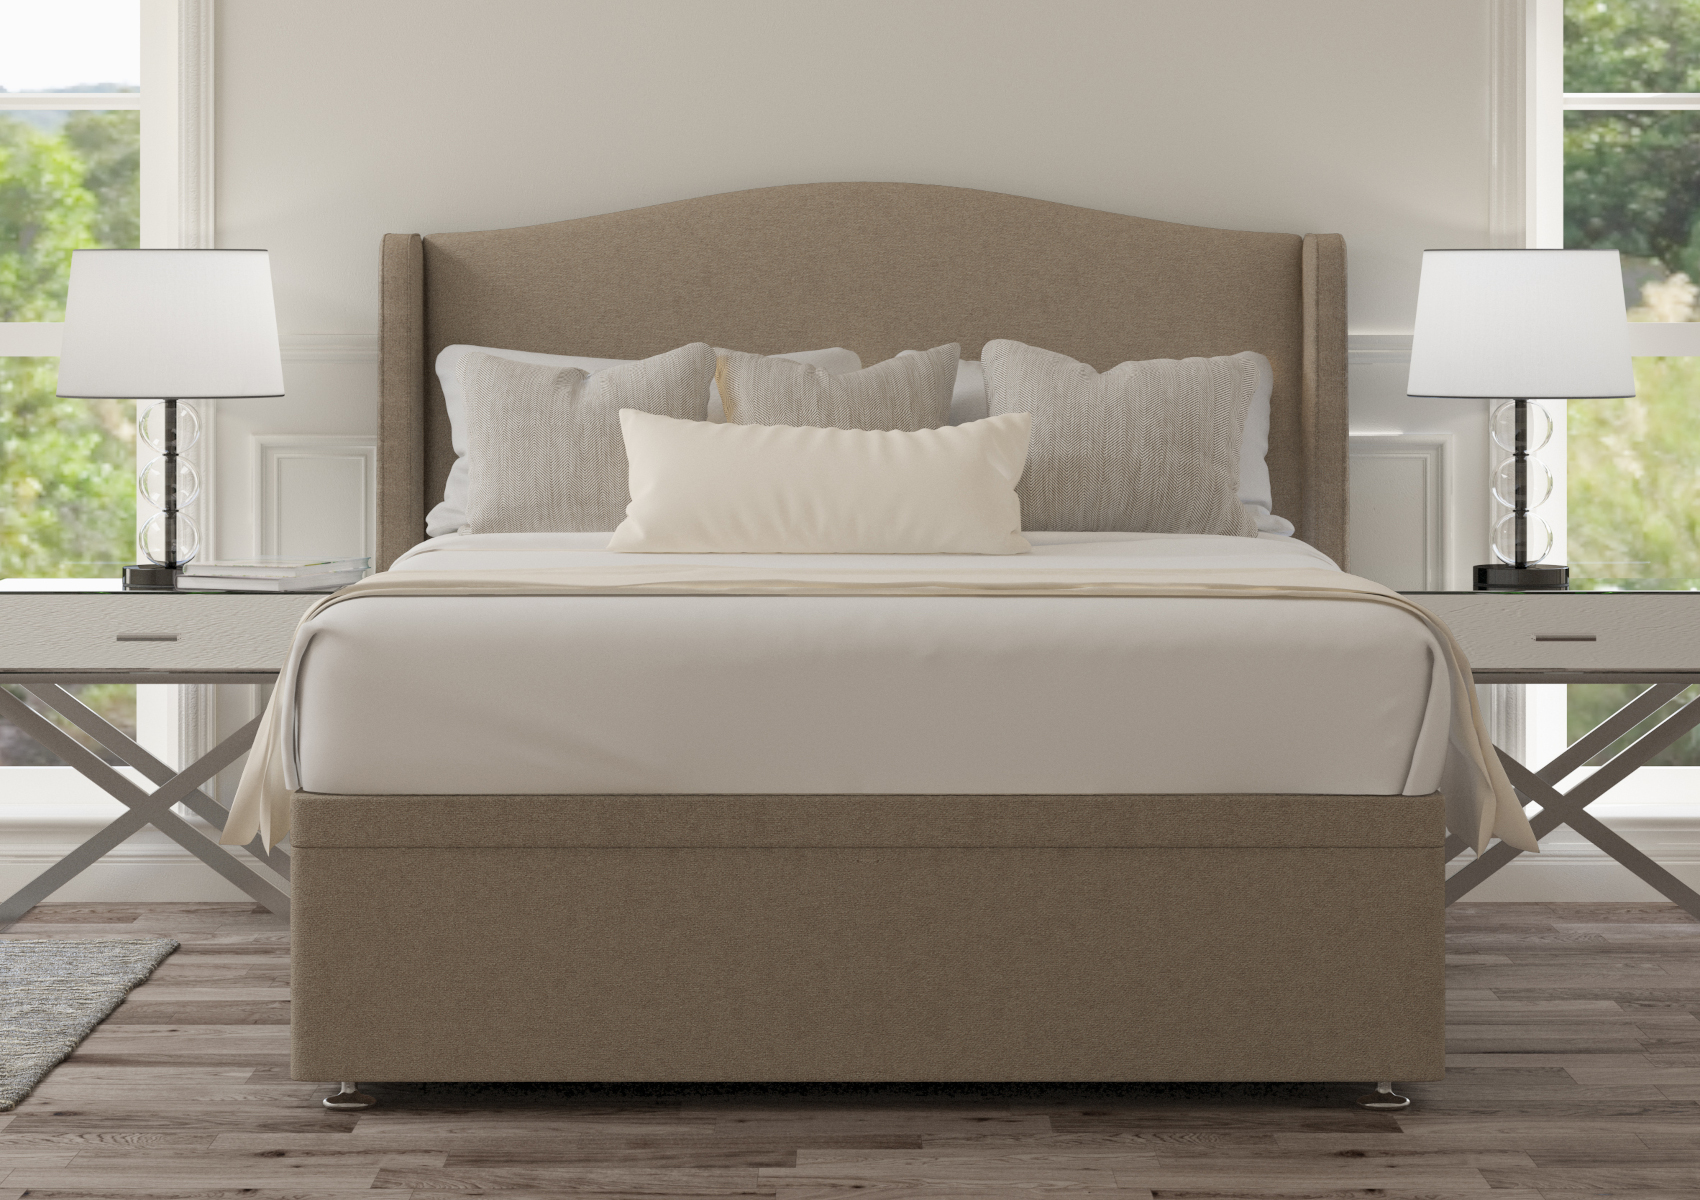 View Mabel Arran Natural Upholstered Double Ottoman Bed Time4Sleep information